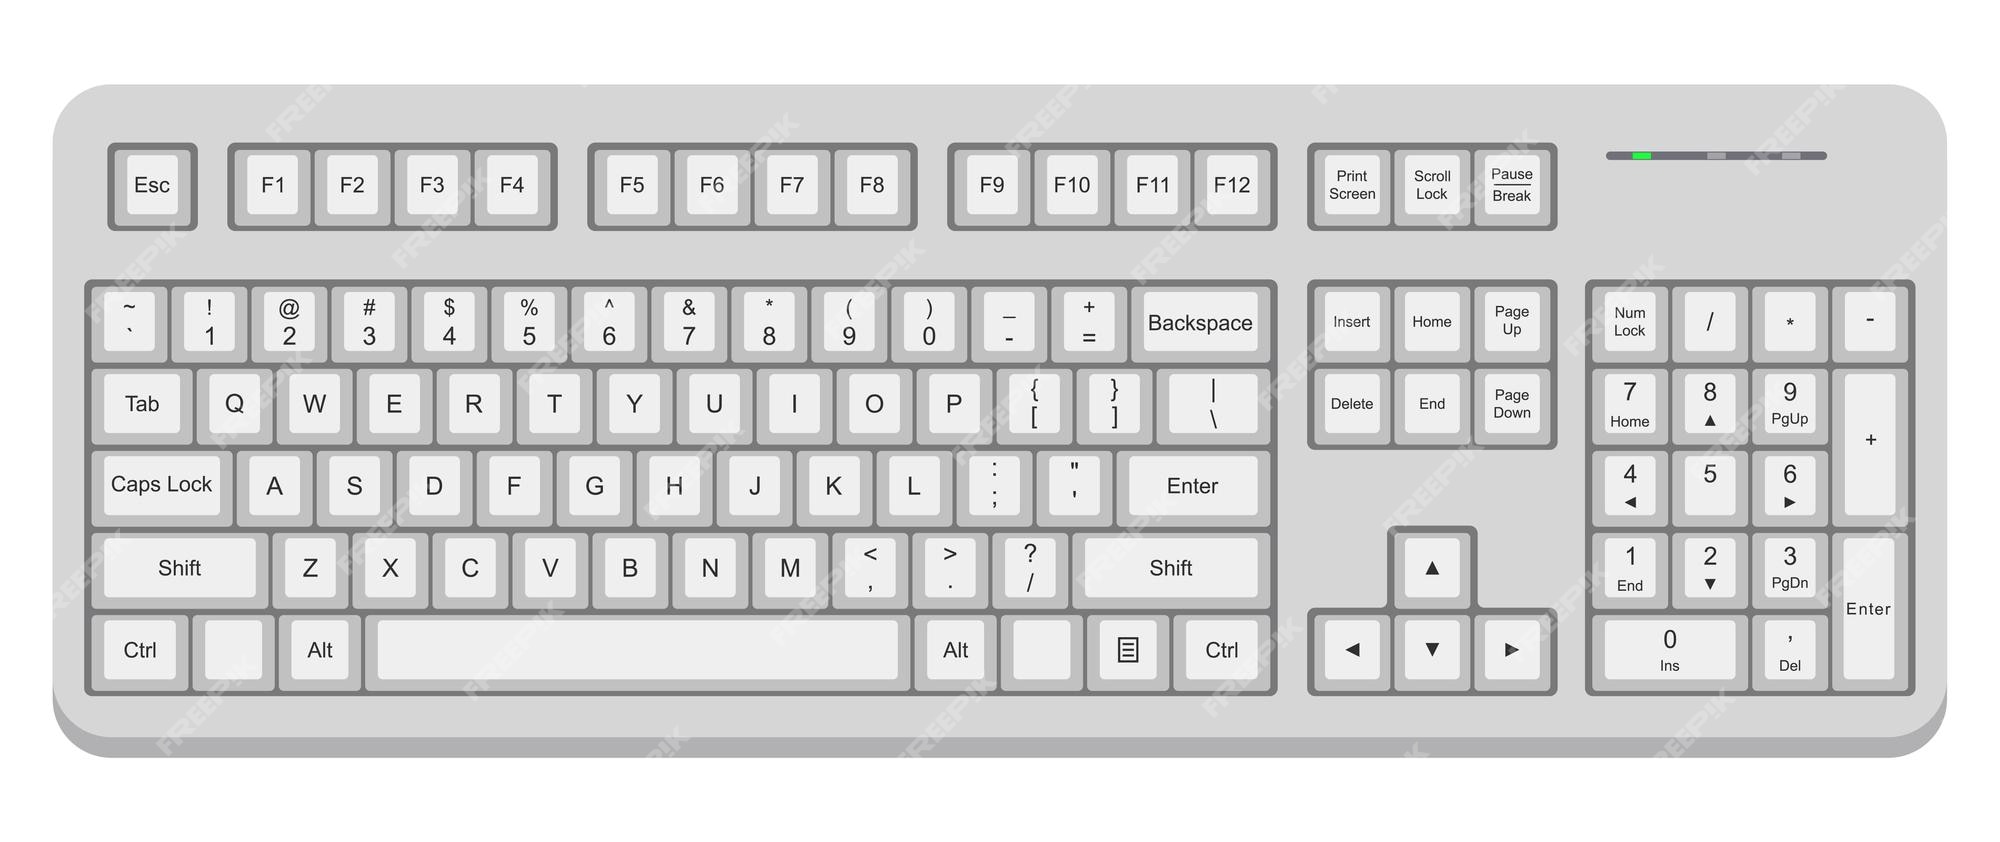 computer keyboard clipart black and white